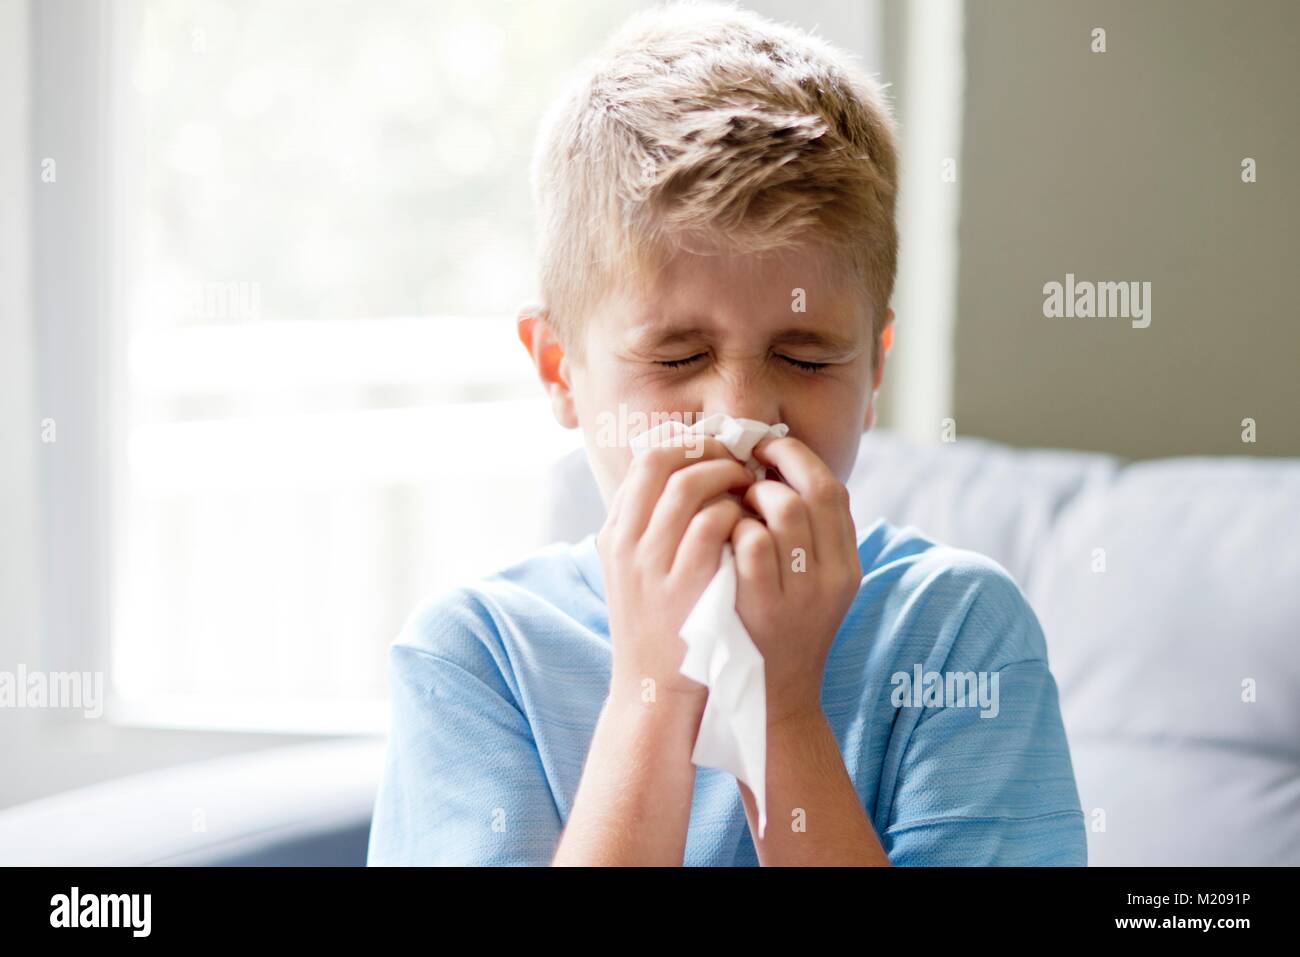 Young boy blowing his nose on a tissue. Stock Photo